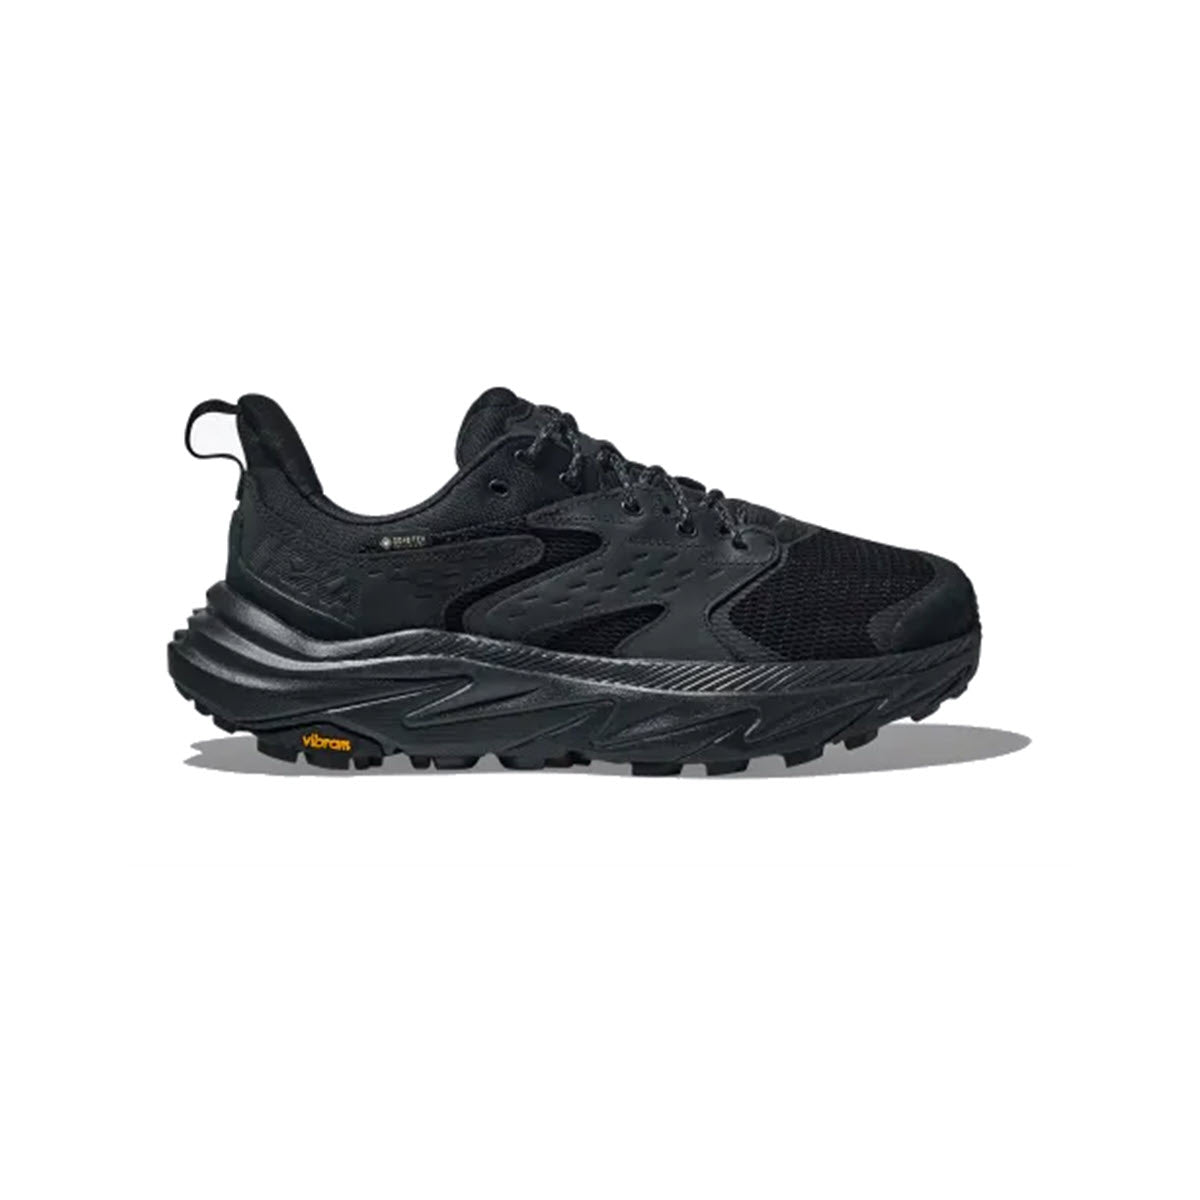 A black Hoka GORE-TEX waterproof trail running shoe with prominent ridged soles and visible Vibram logo on the side.